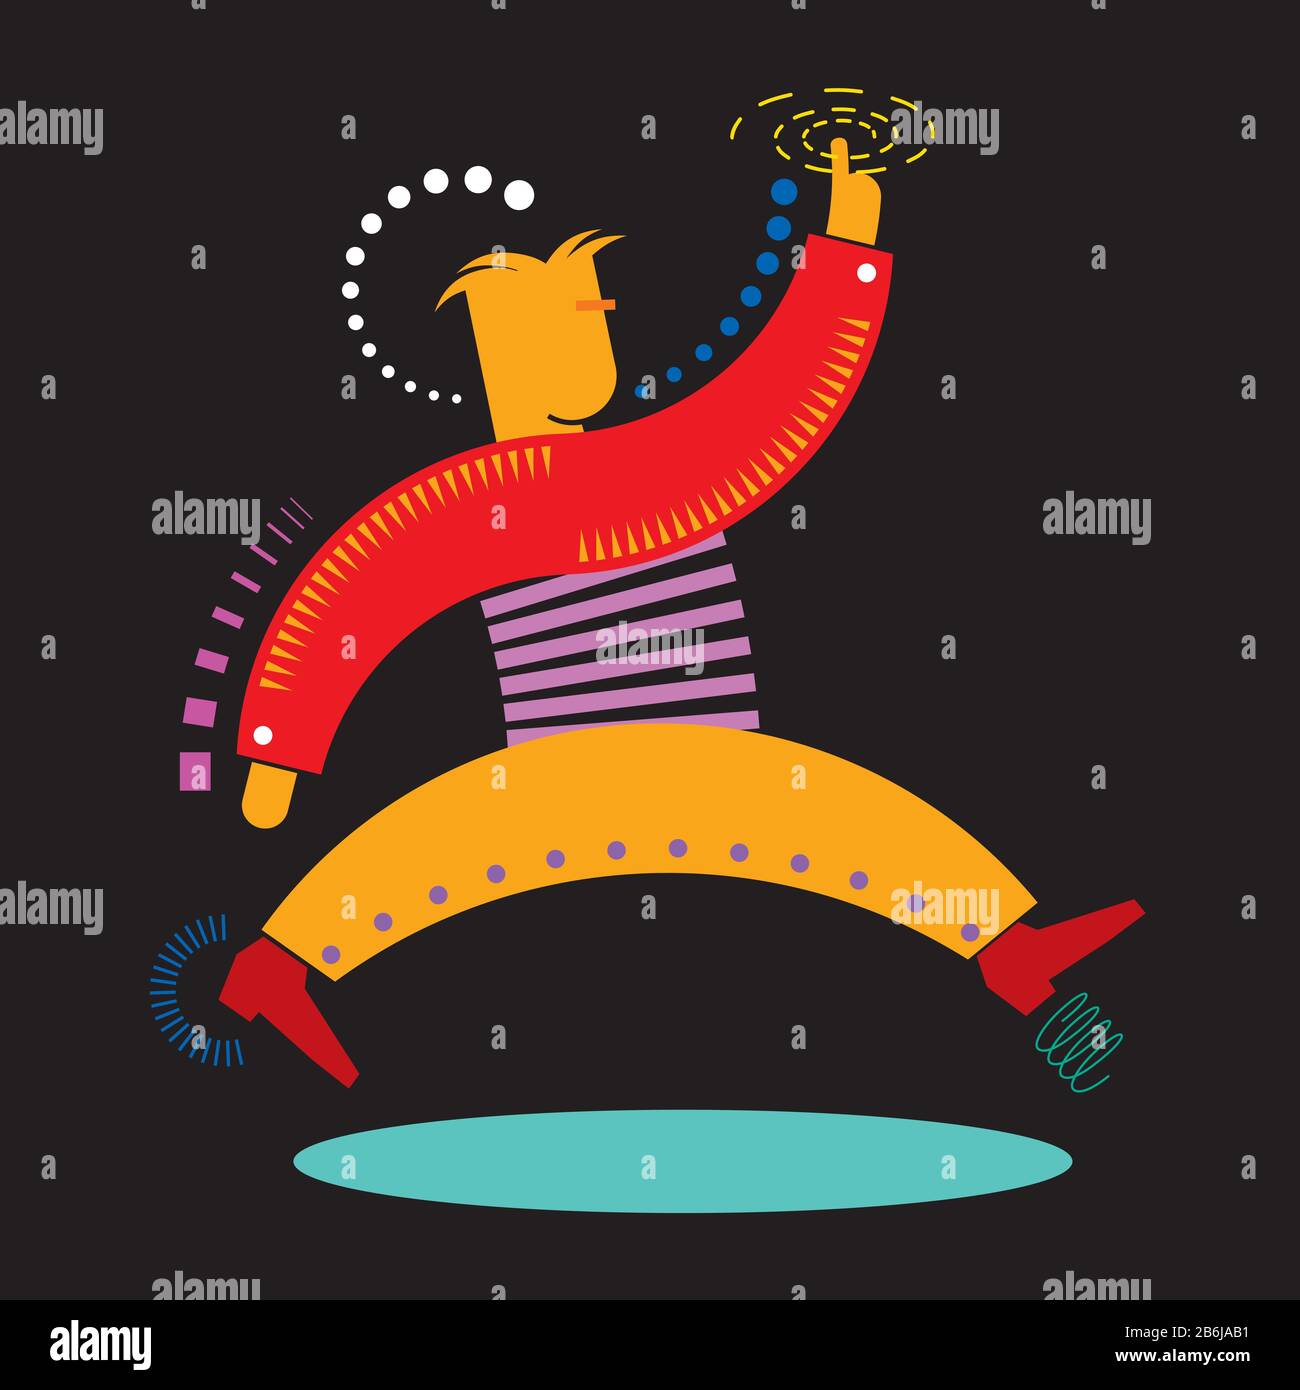 Illustration of the authentic dinamic man. Vector. Stock Vector